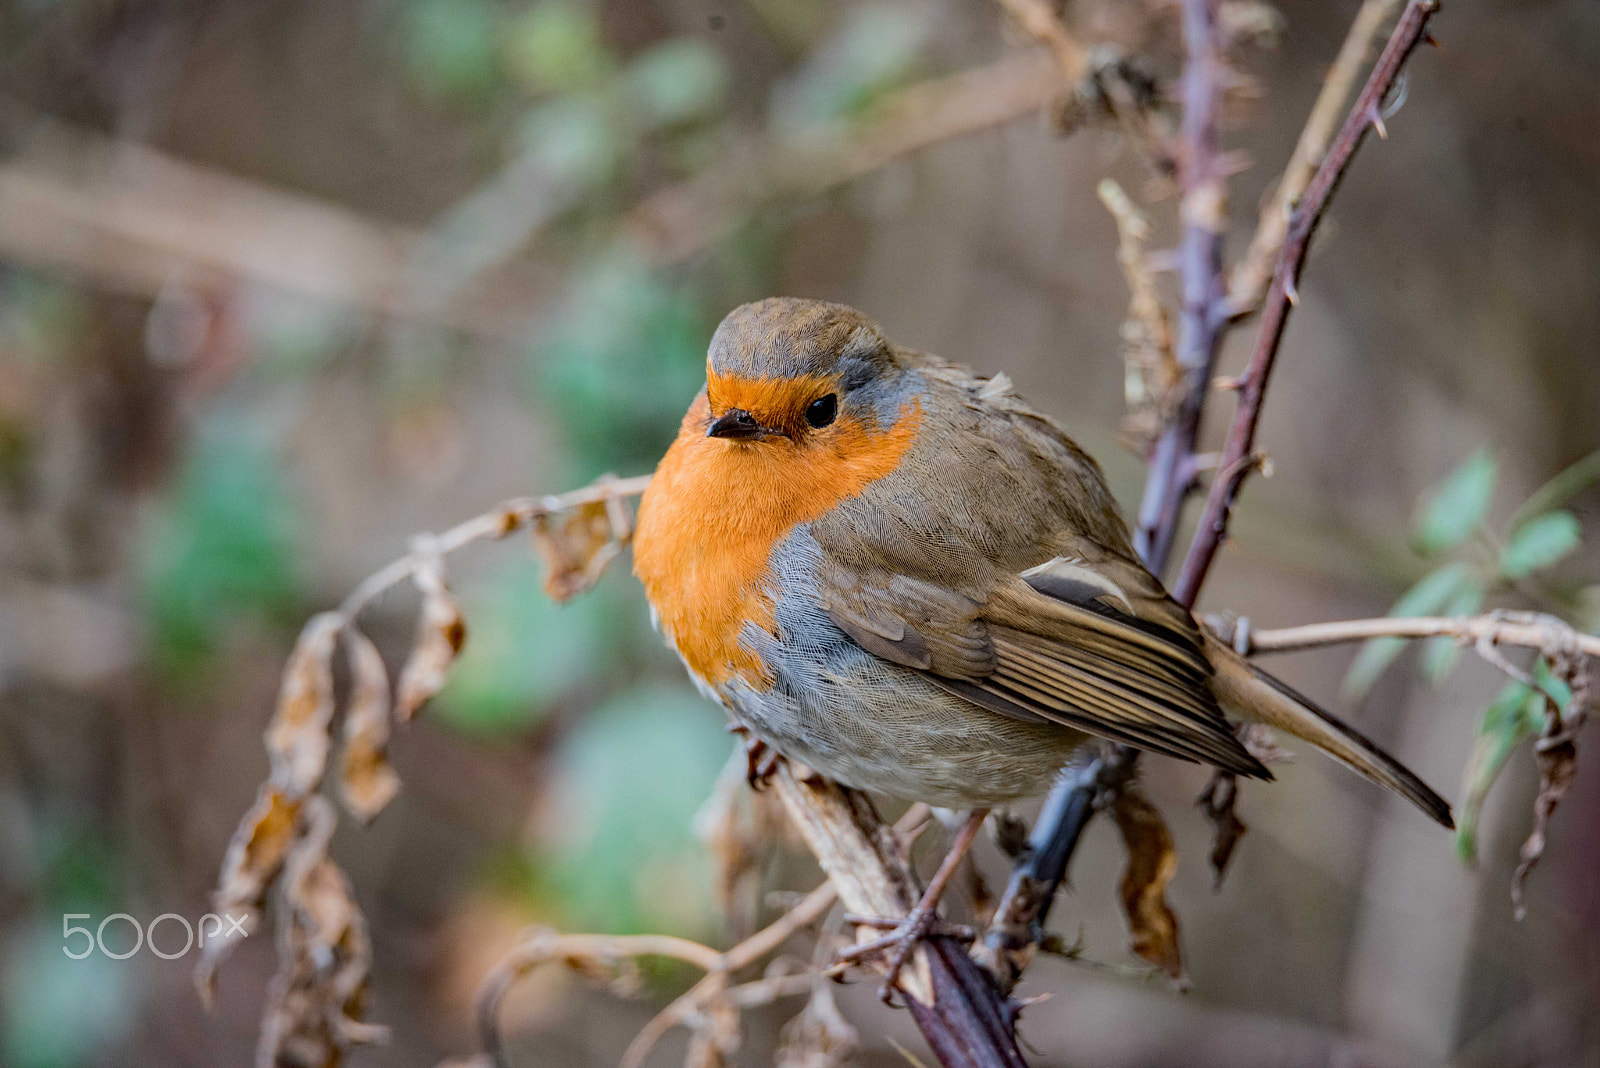 Nikon D750 + Sigma 150-600mm F5-6.3 DG OS HSM | S sample photo. Yet another robin photography